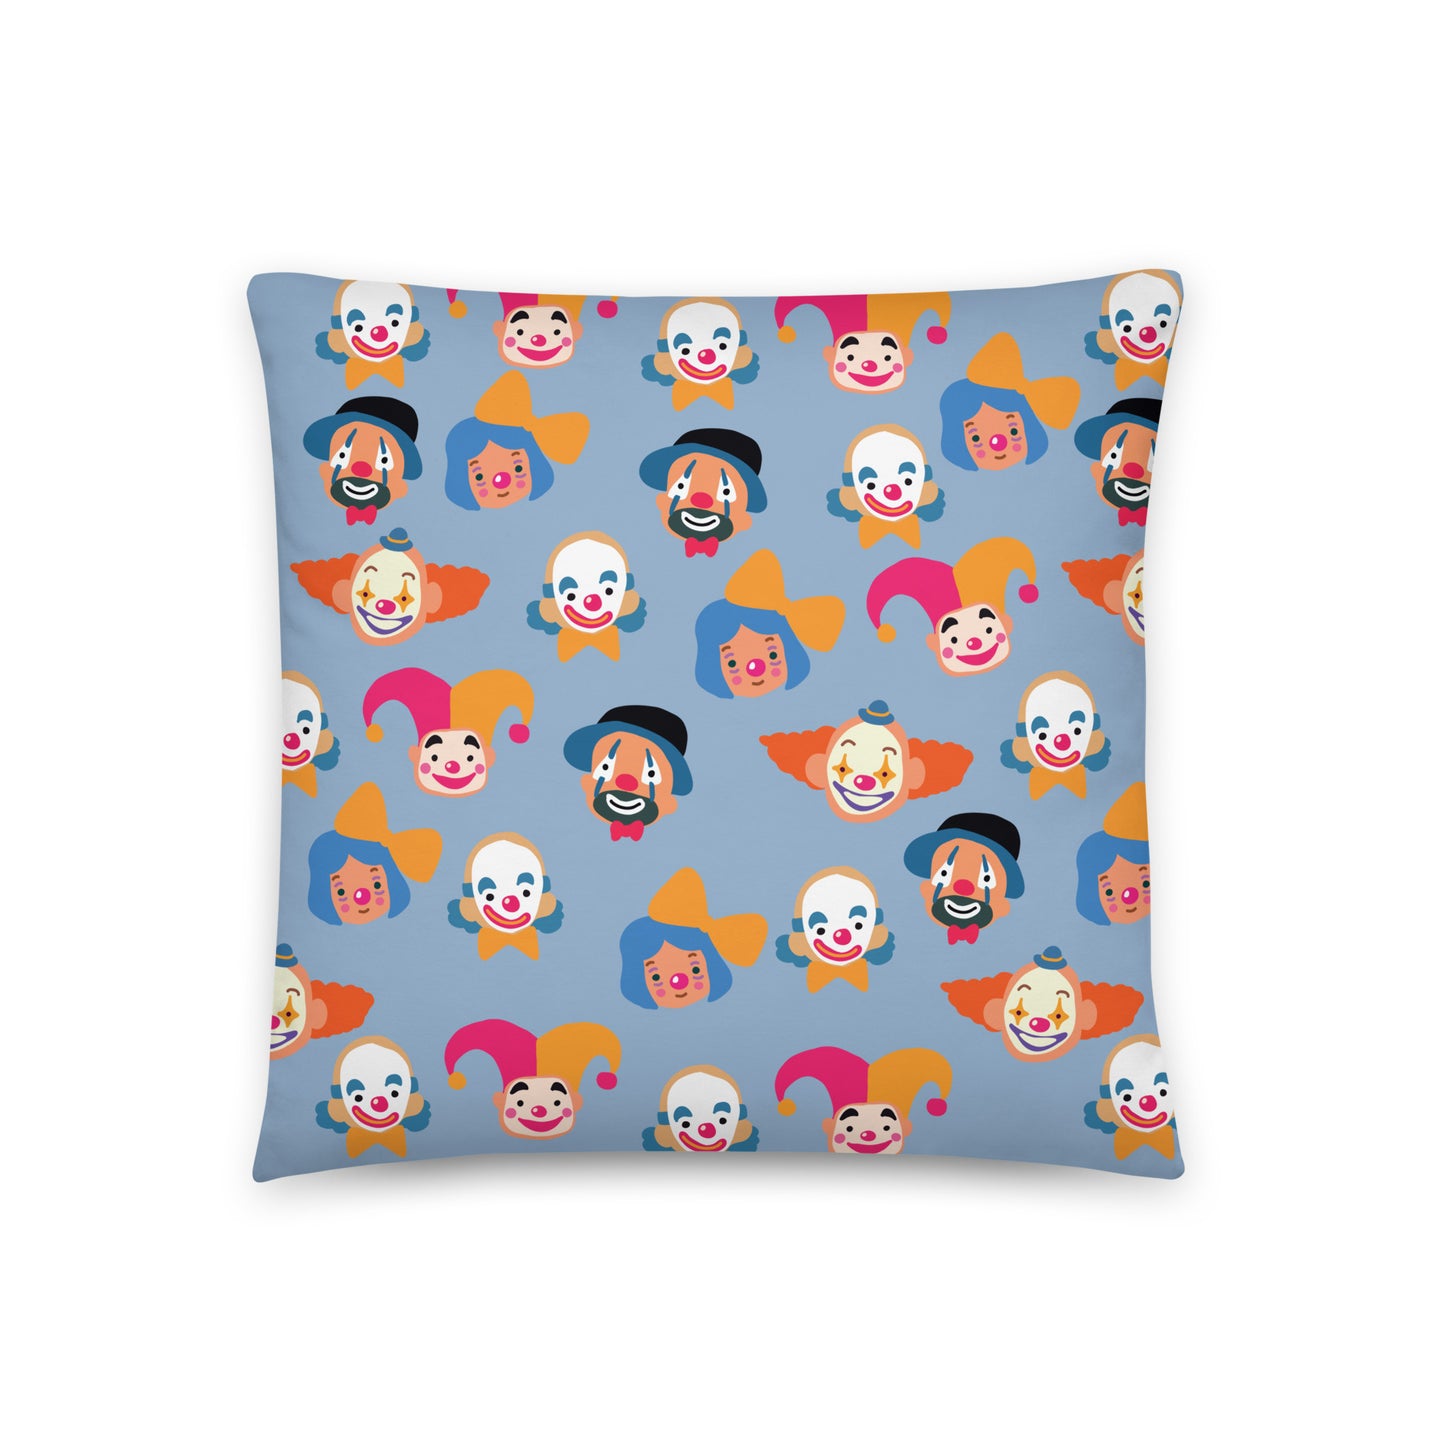 Clown - Sustainably Made Pillows